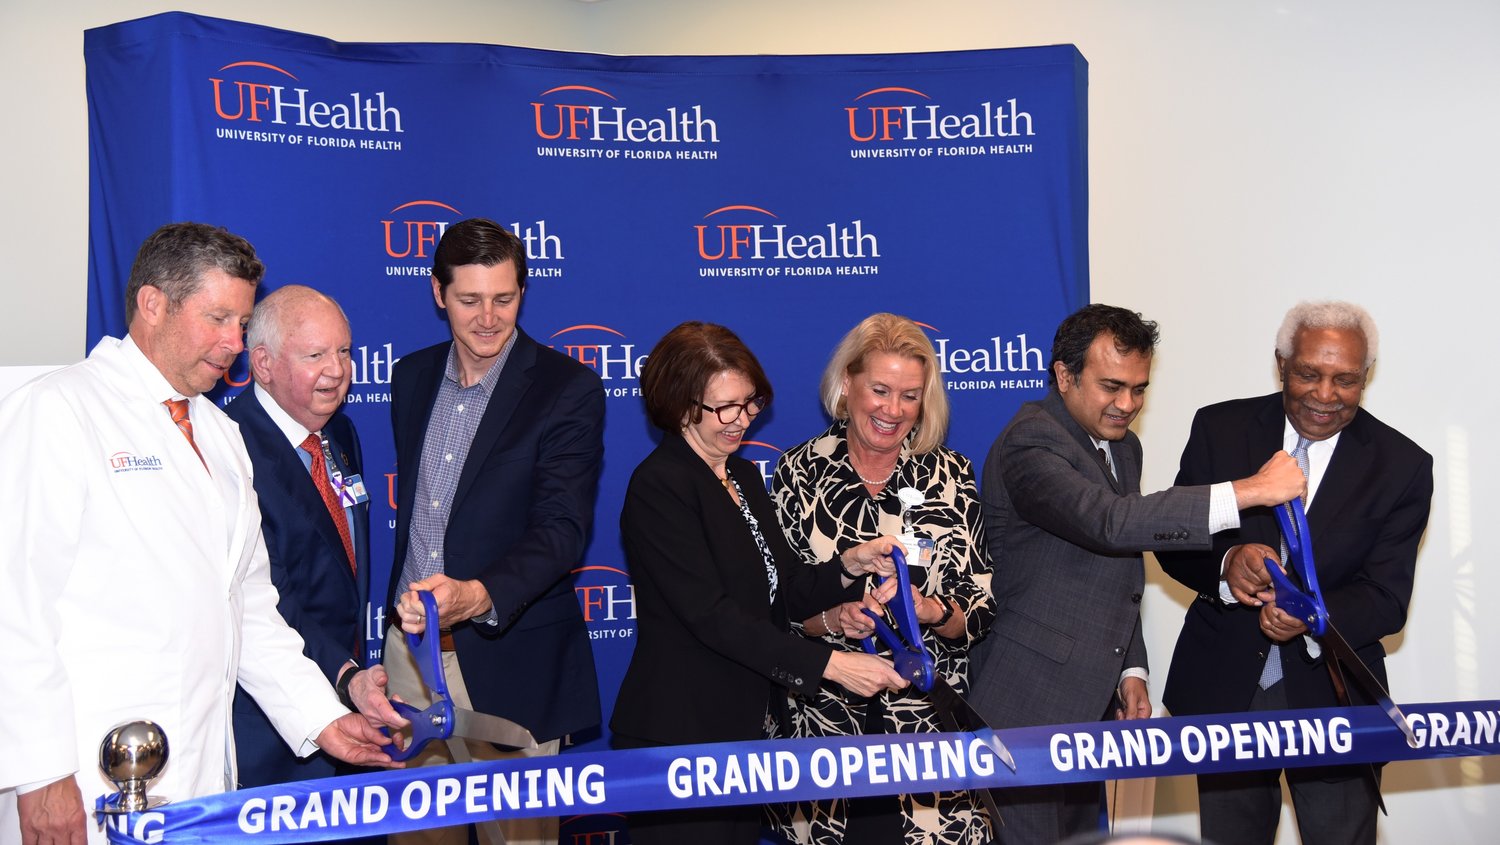 Representatives of UF Health Jacksonville, the Gary Sinise Foundation and philanthropic partners cut the ribbon on a new facility that brings comprehensive brain health care to Northeast Florida.